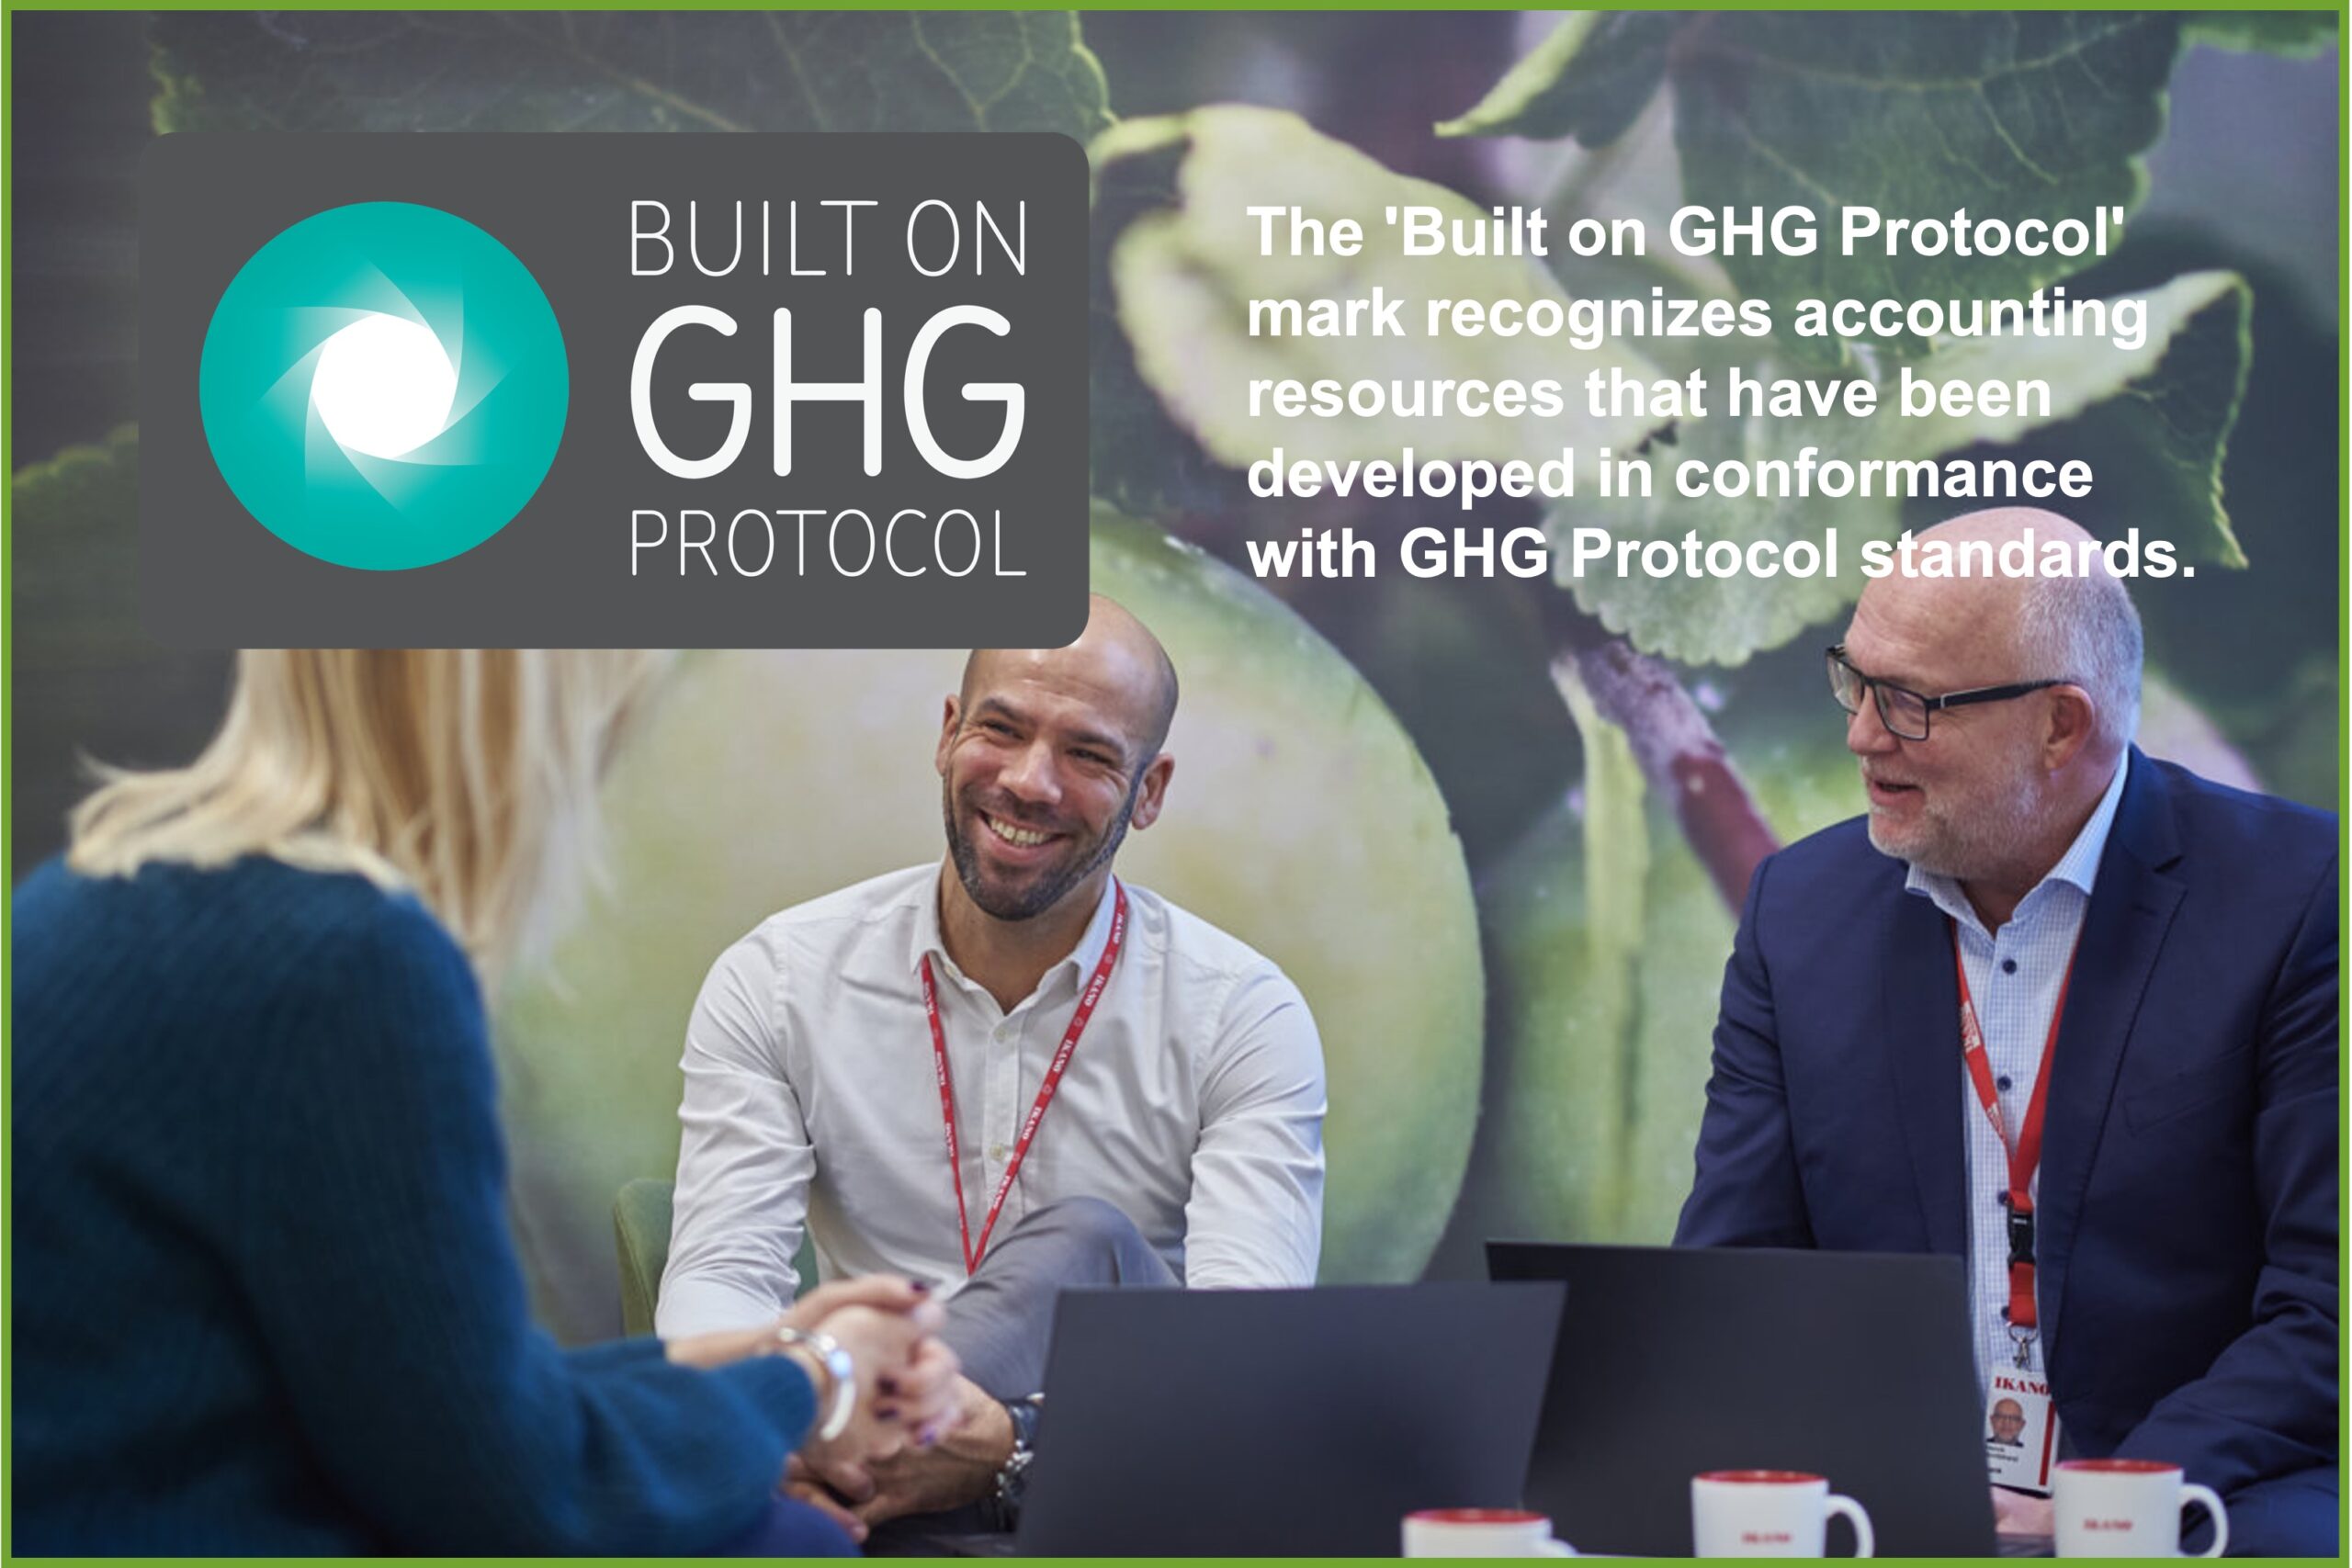 The 'Built on GHG Protocol' mark recognizes accounting resources that have been developed in conformance with GHG Protocol standards.